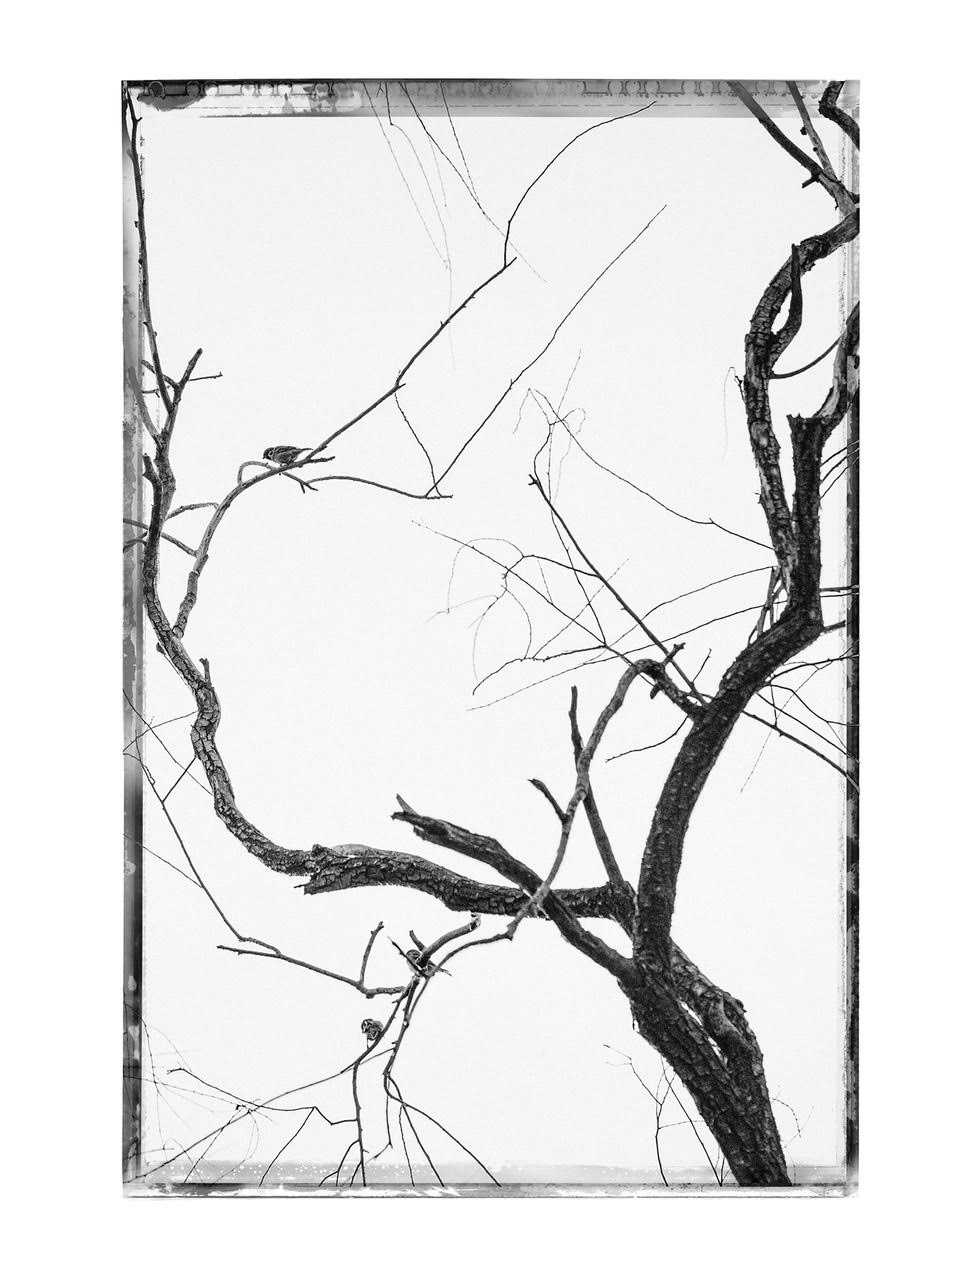 Kim Jungman: Can You Hear the Wind Blow, Special Limited Edition (with Unique Gelatin Silver Print, Edition of 1) [SIGNED]